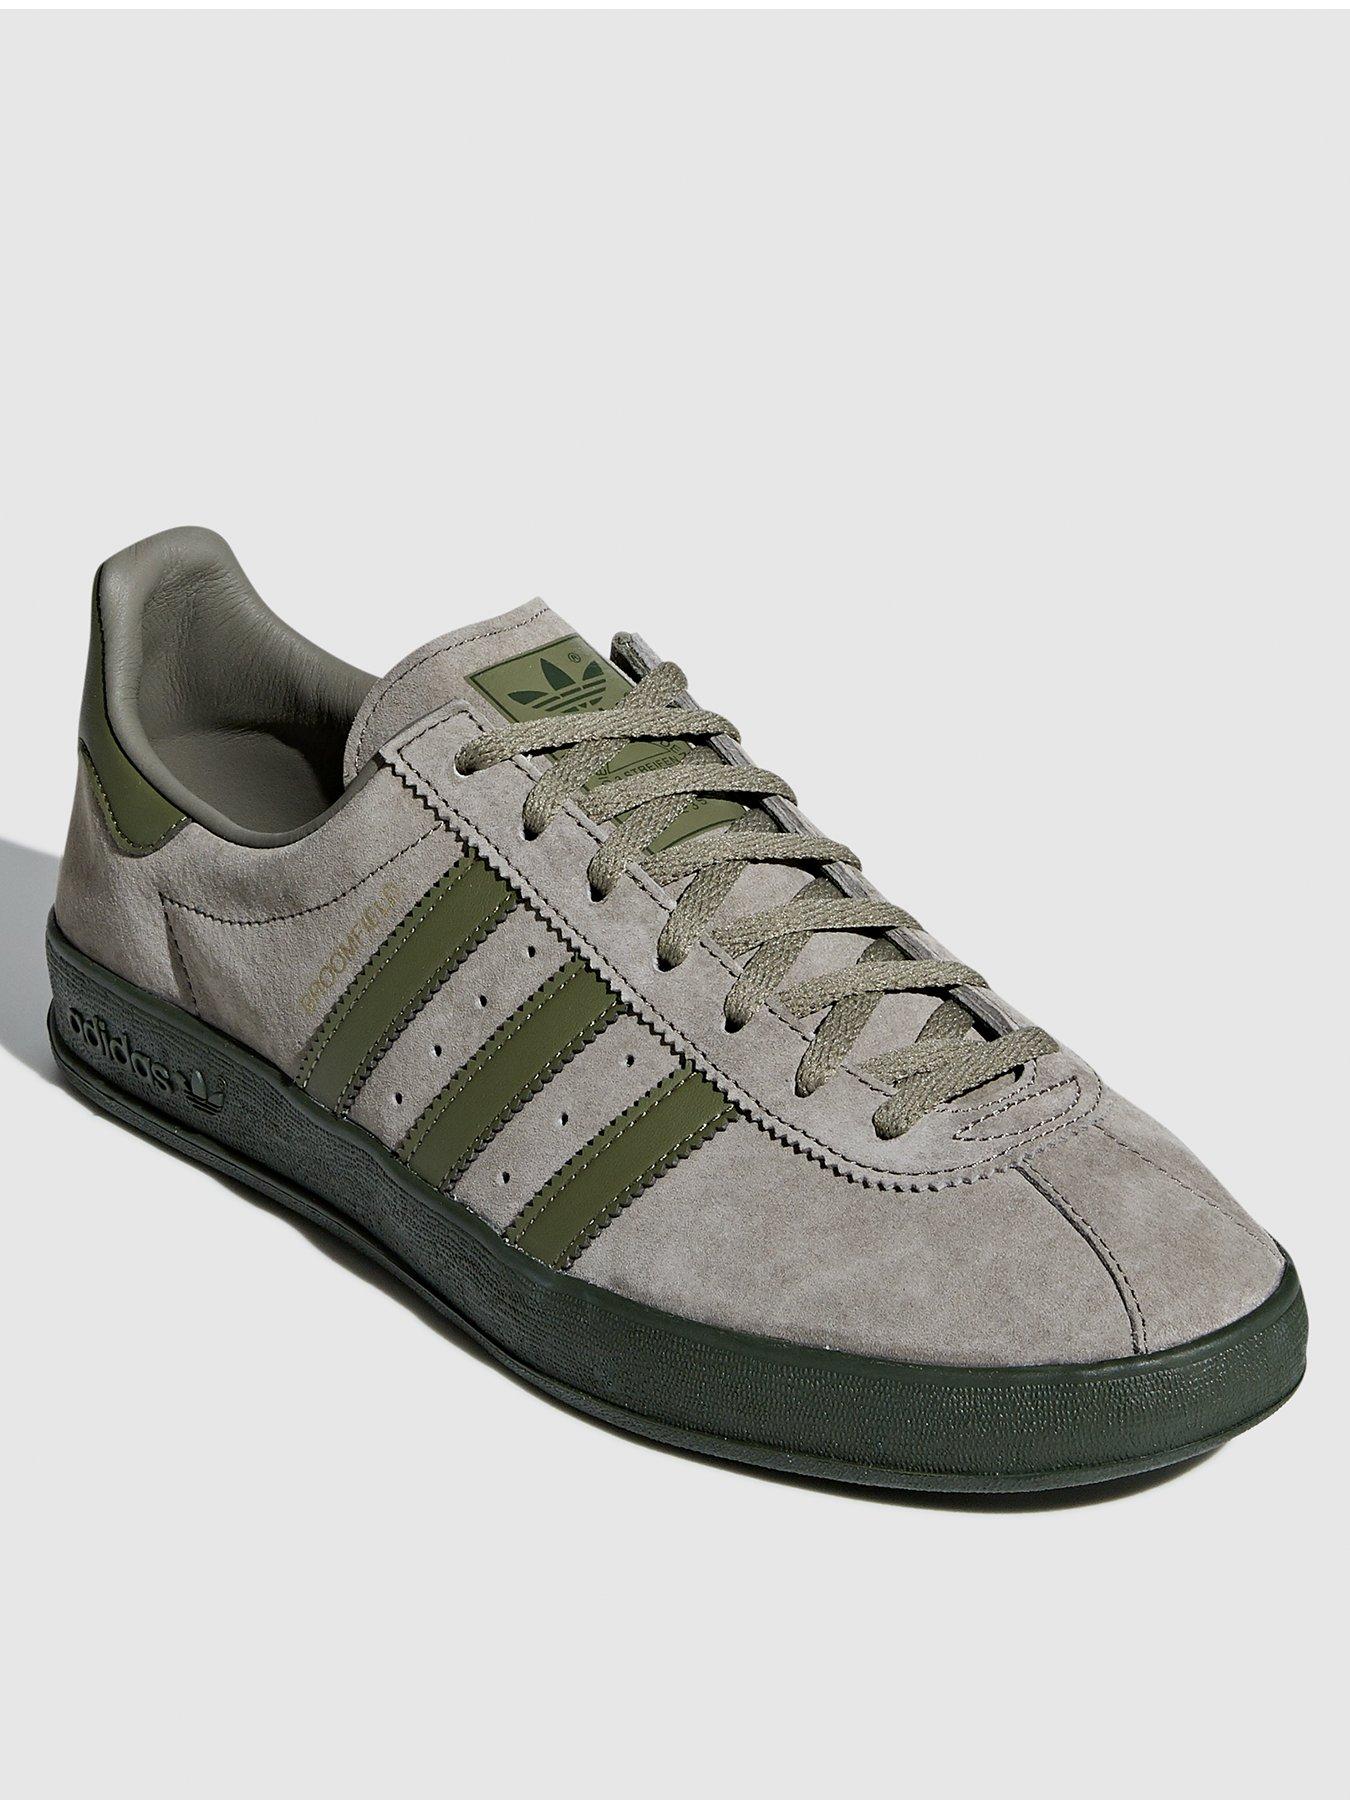 littlewoods mens trainers adidas